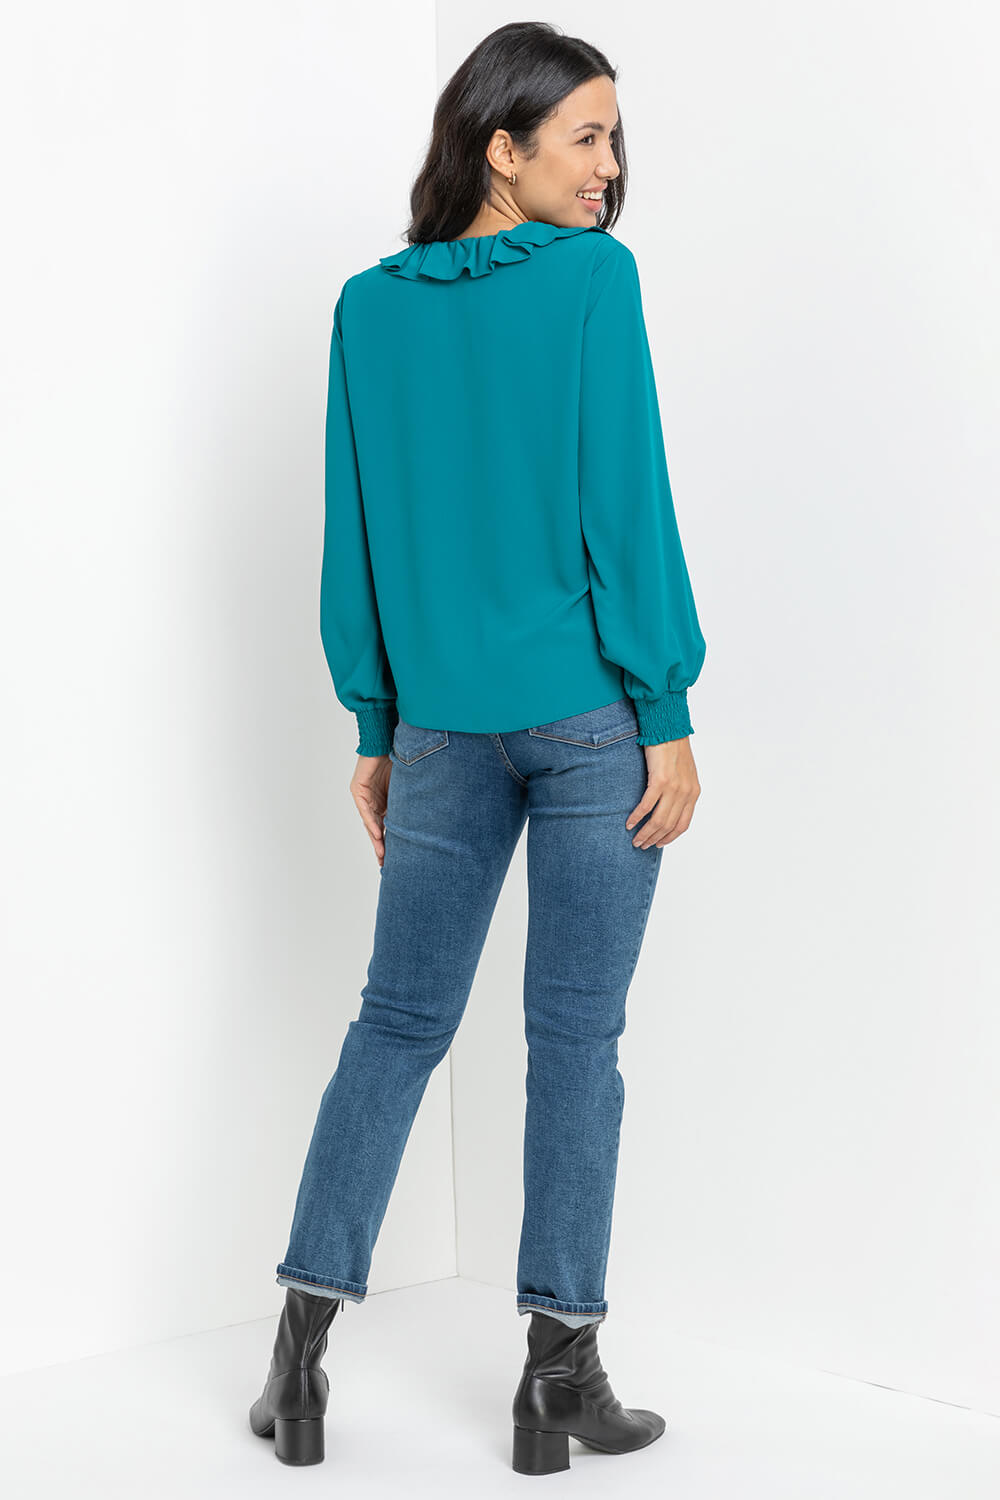 Teal Chiffon Frill Neck Detail Top, Image 2 of 4